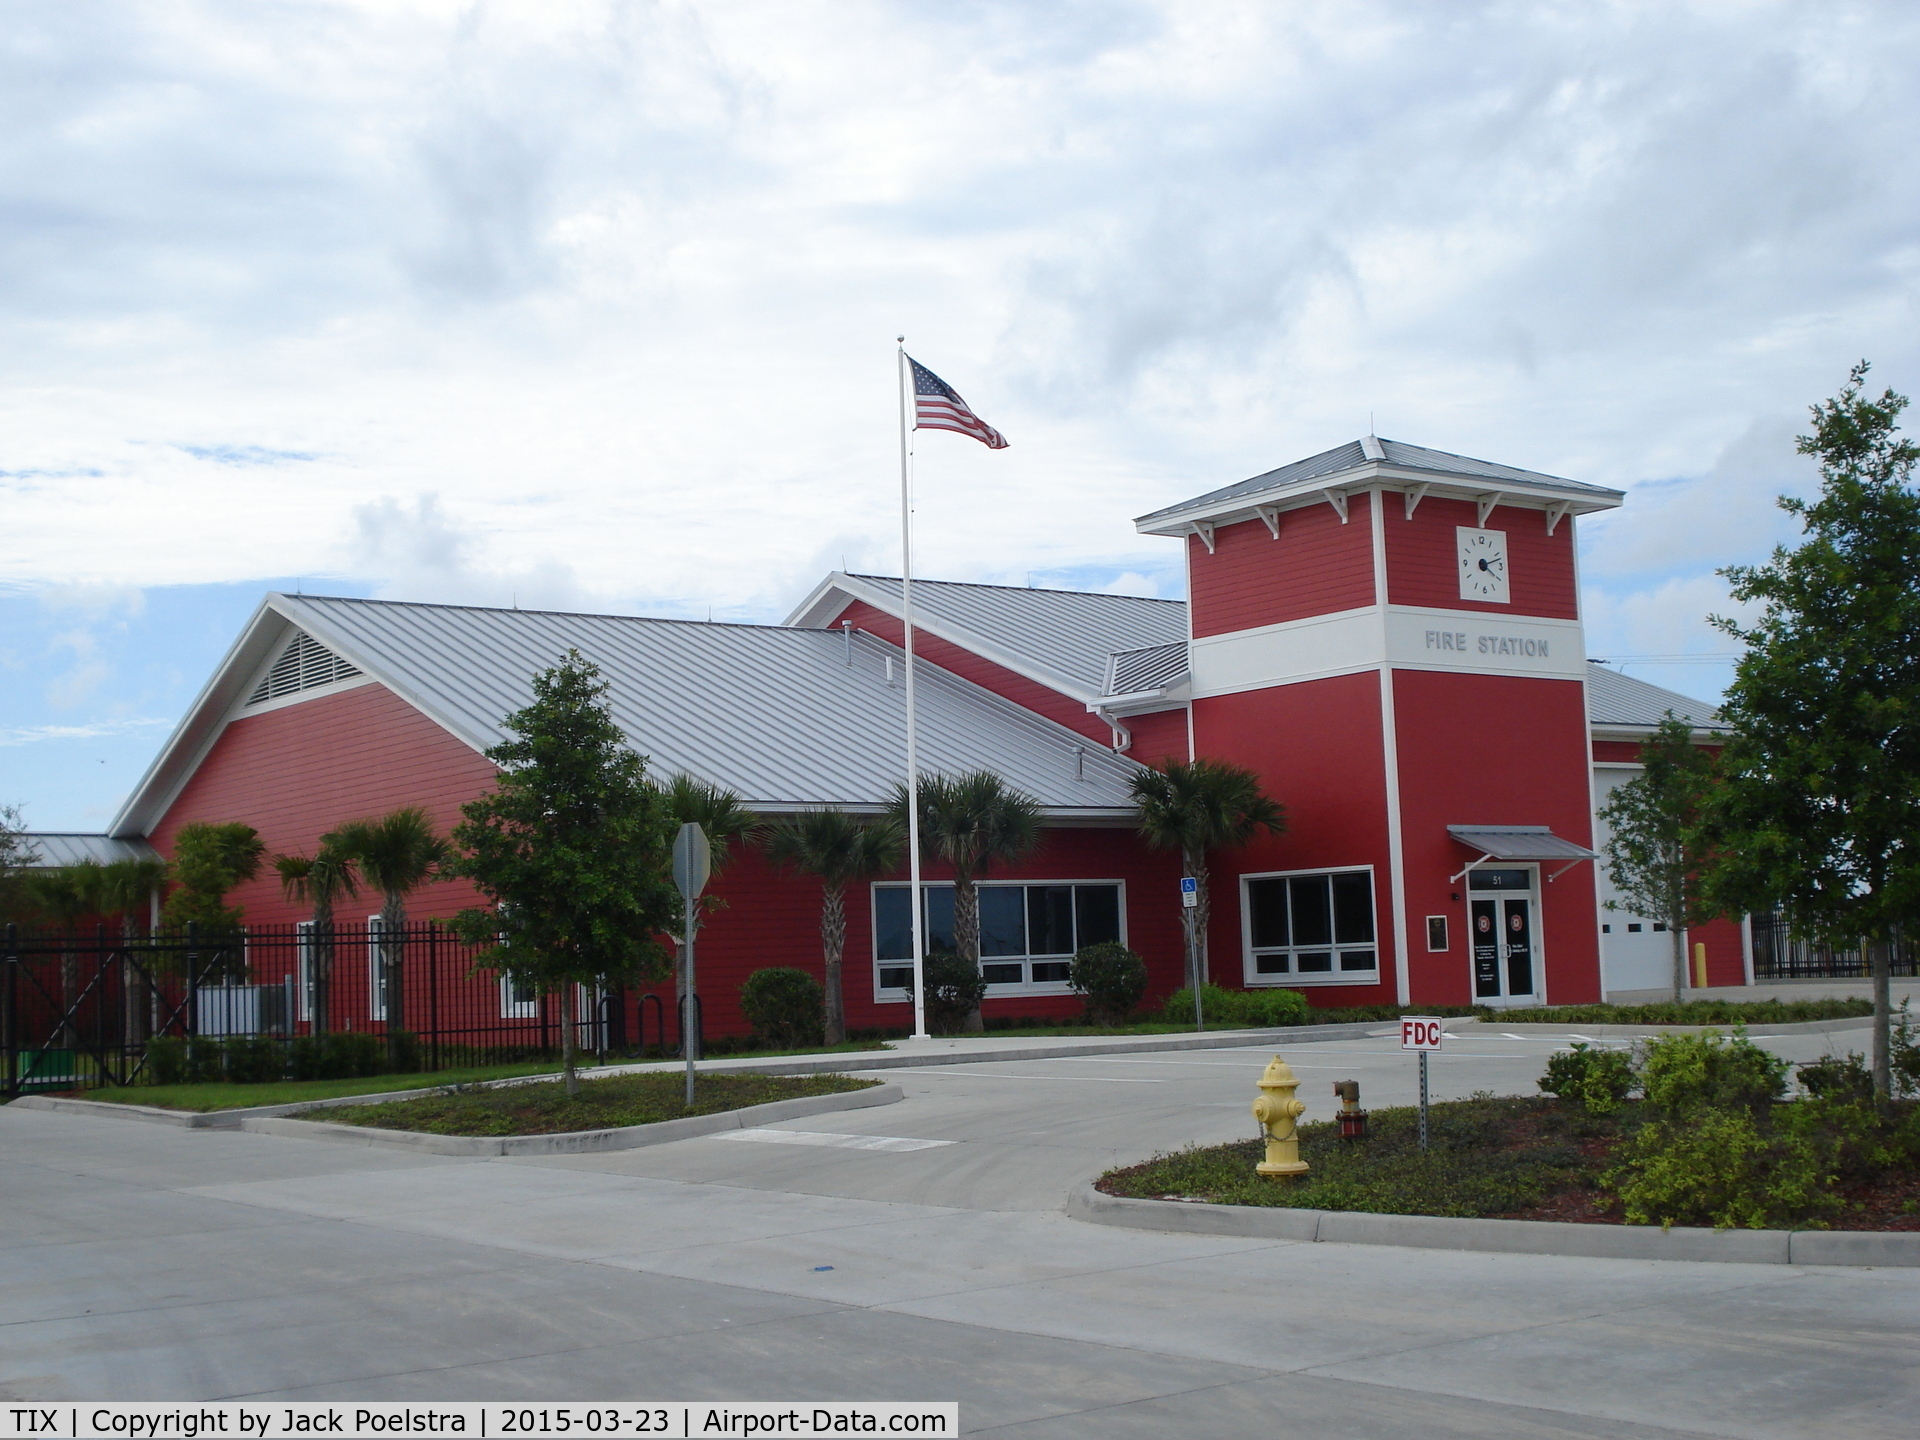 Space Coast Regional Airport (TIX) - Airport Fire station at Space coast airport, Titusville  Fla.